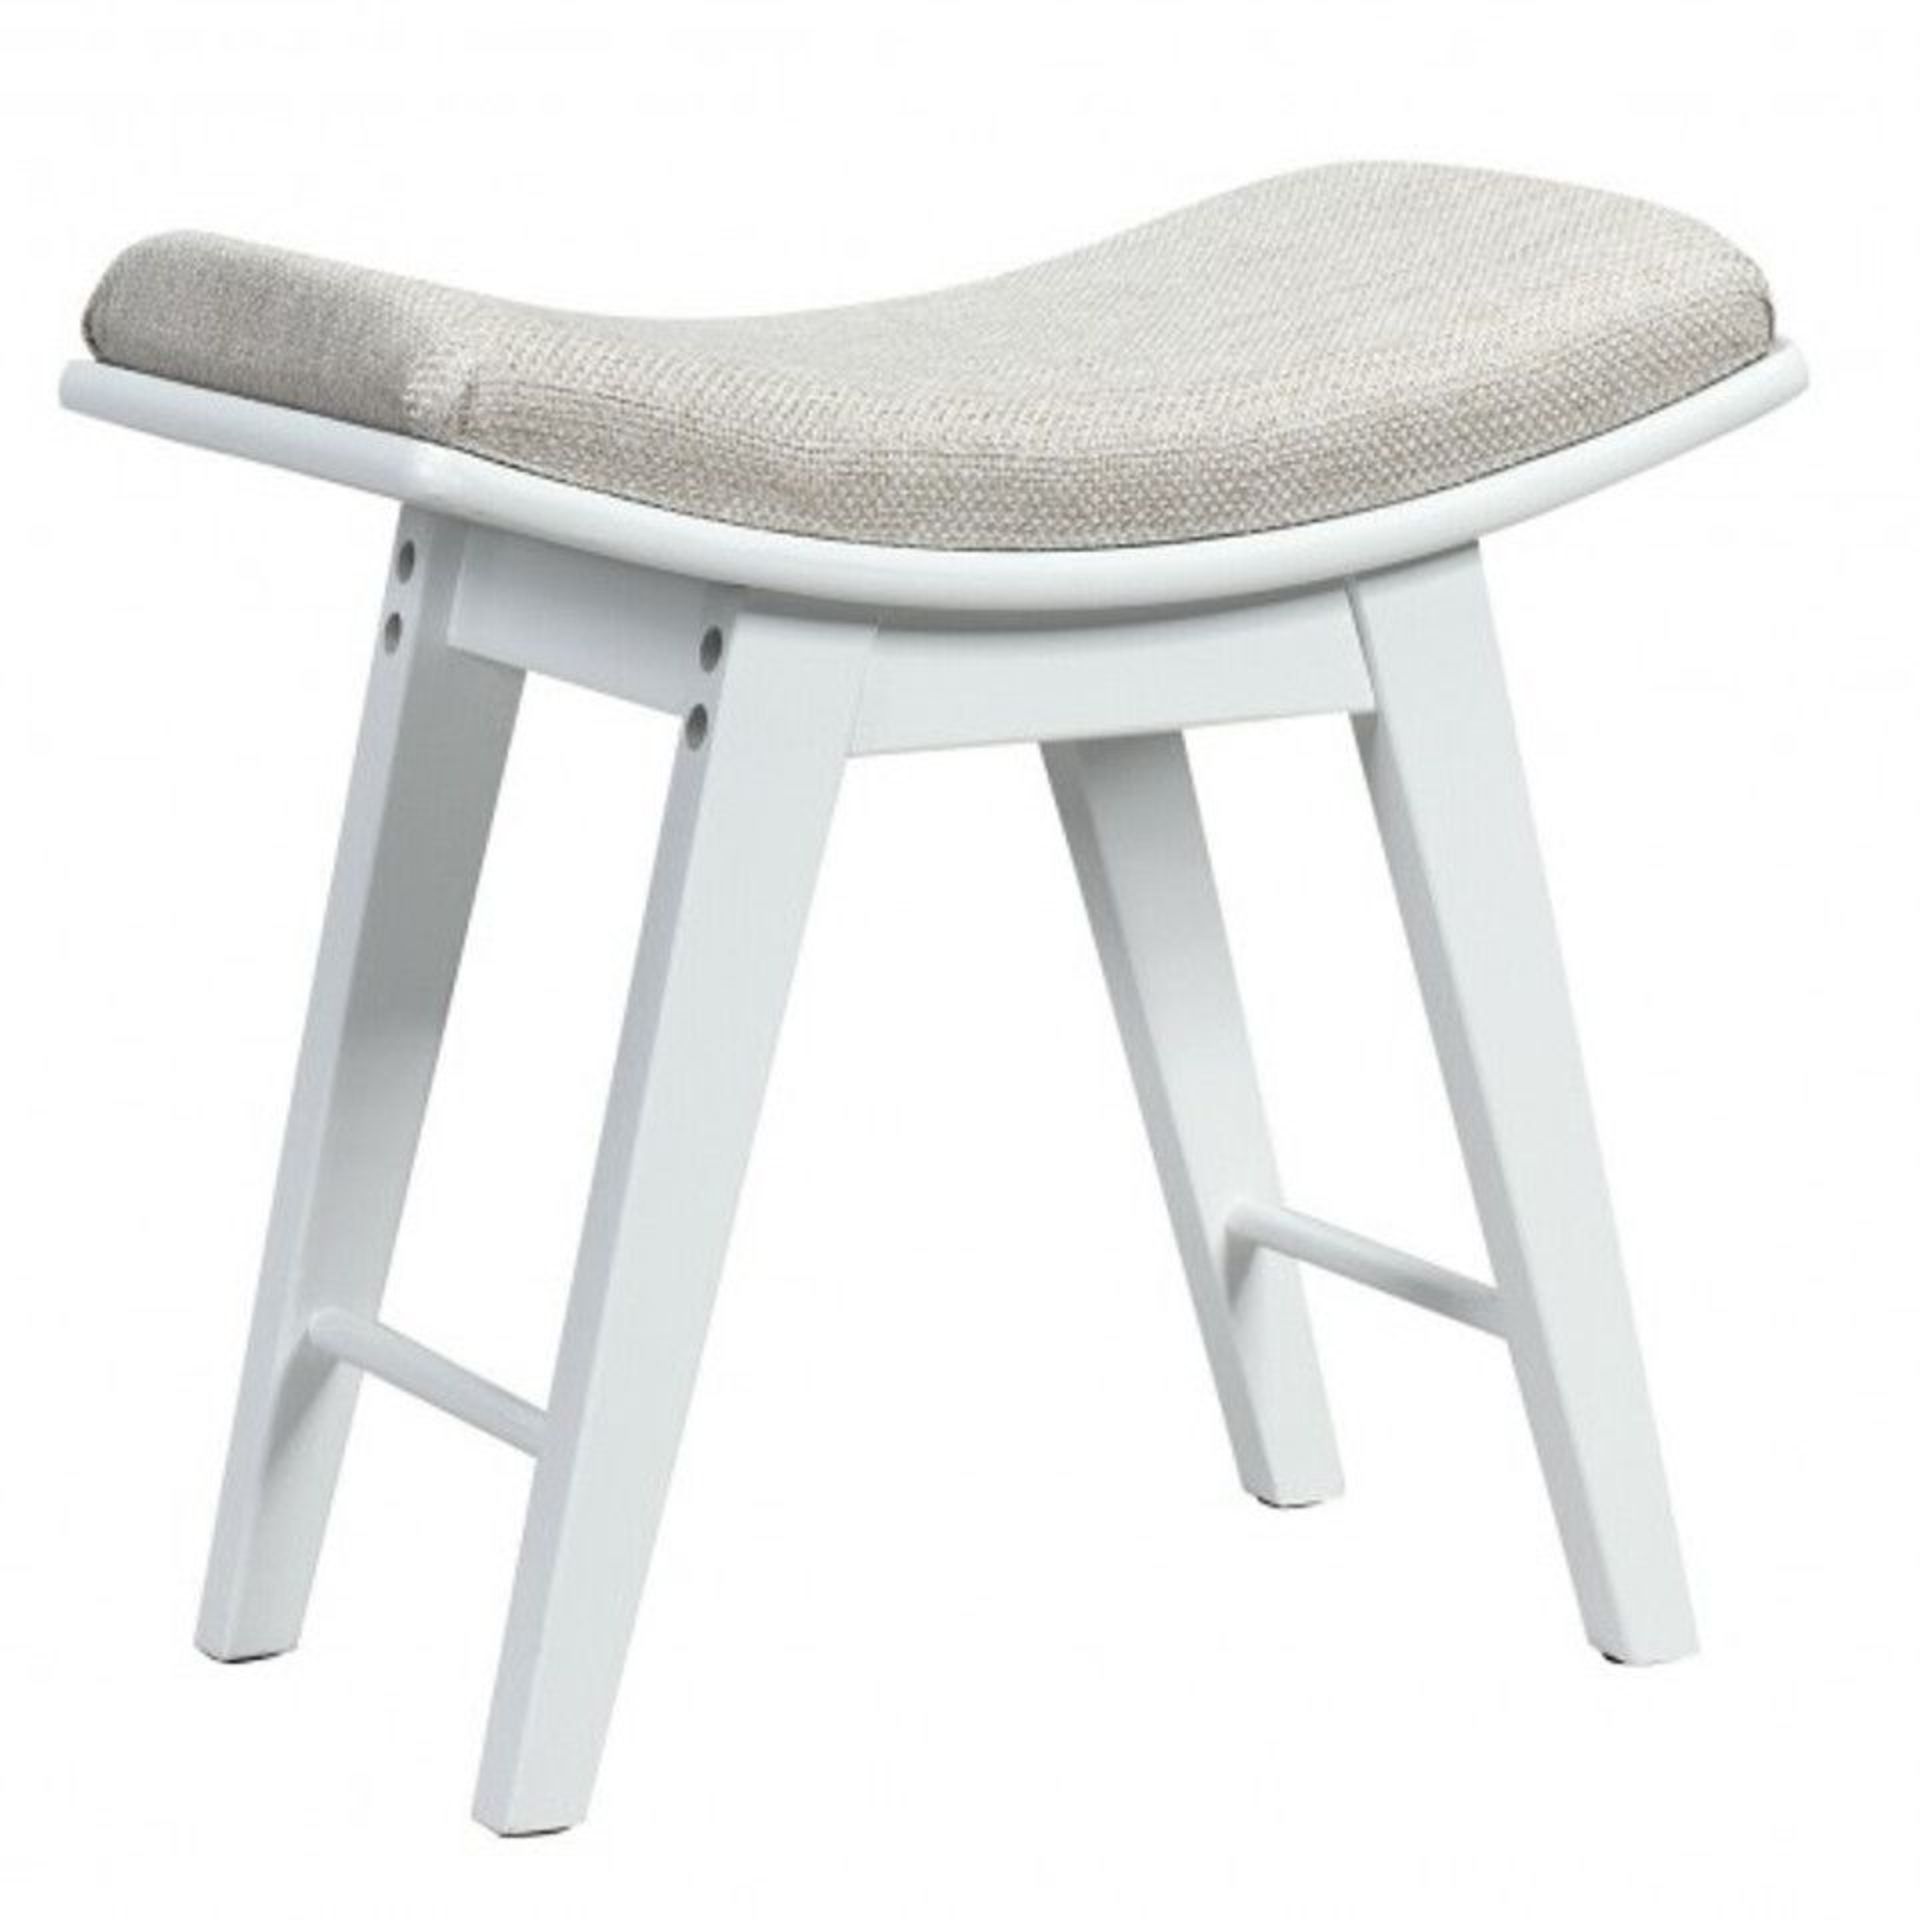 Modern Dressing Makeup Stool With Concave Seat Rubberwood Legs-White HW66055WH. - ER53.